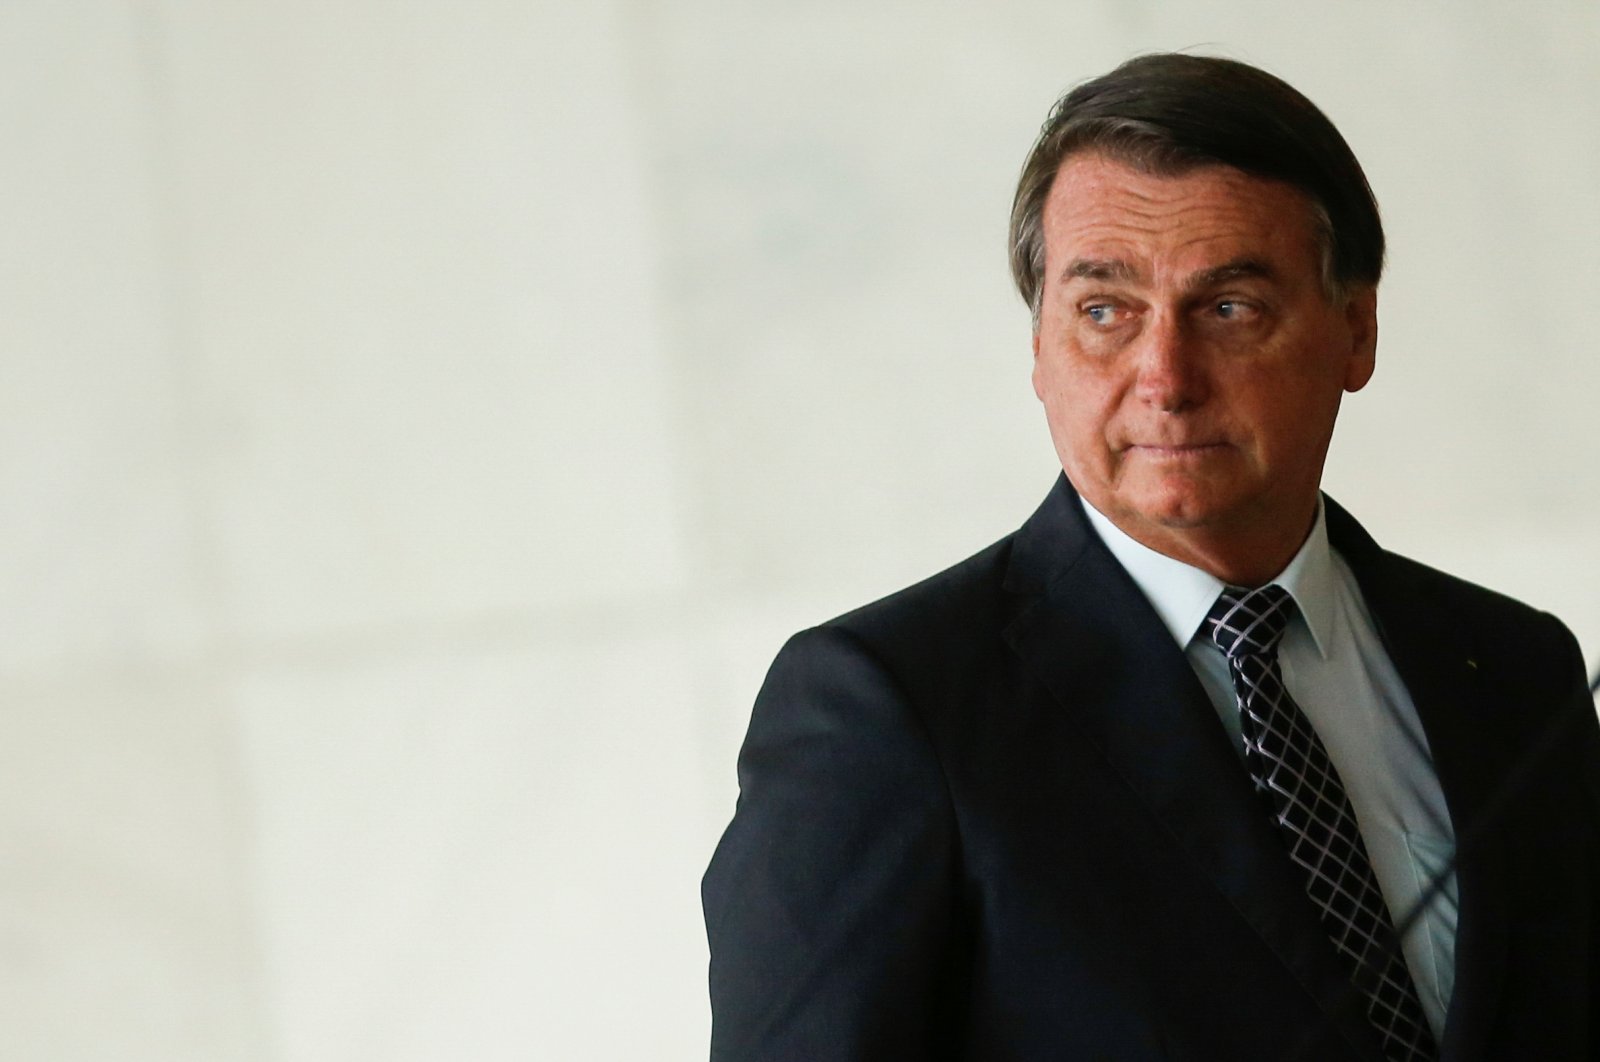 Brazil's President Jair Bolsonaro looks on before delivering a statement to the media with U.S. National Security Advisor Robert O'Brien (not pictured) at the Itamaraty Palace in Brasilia, Brazil, Oct. 20, 2020. (Reuters Photo)